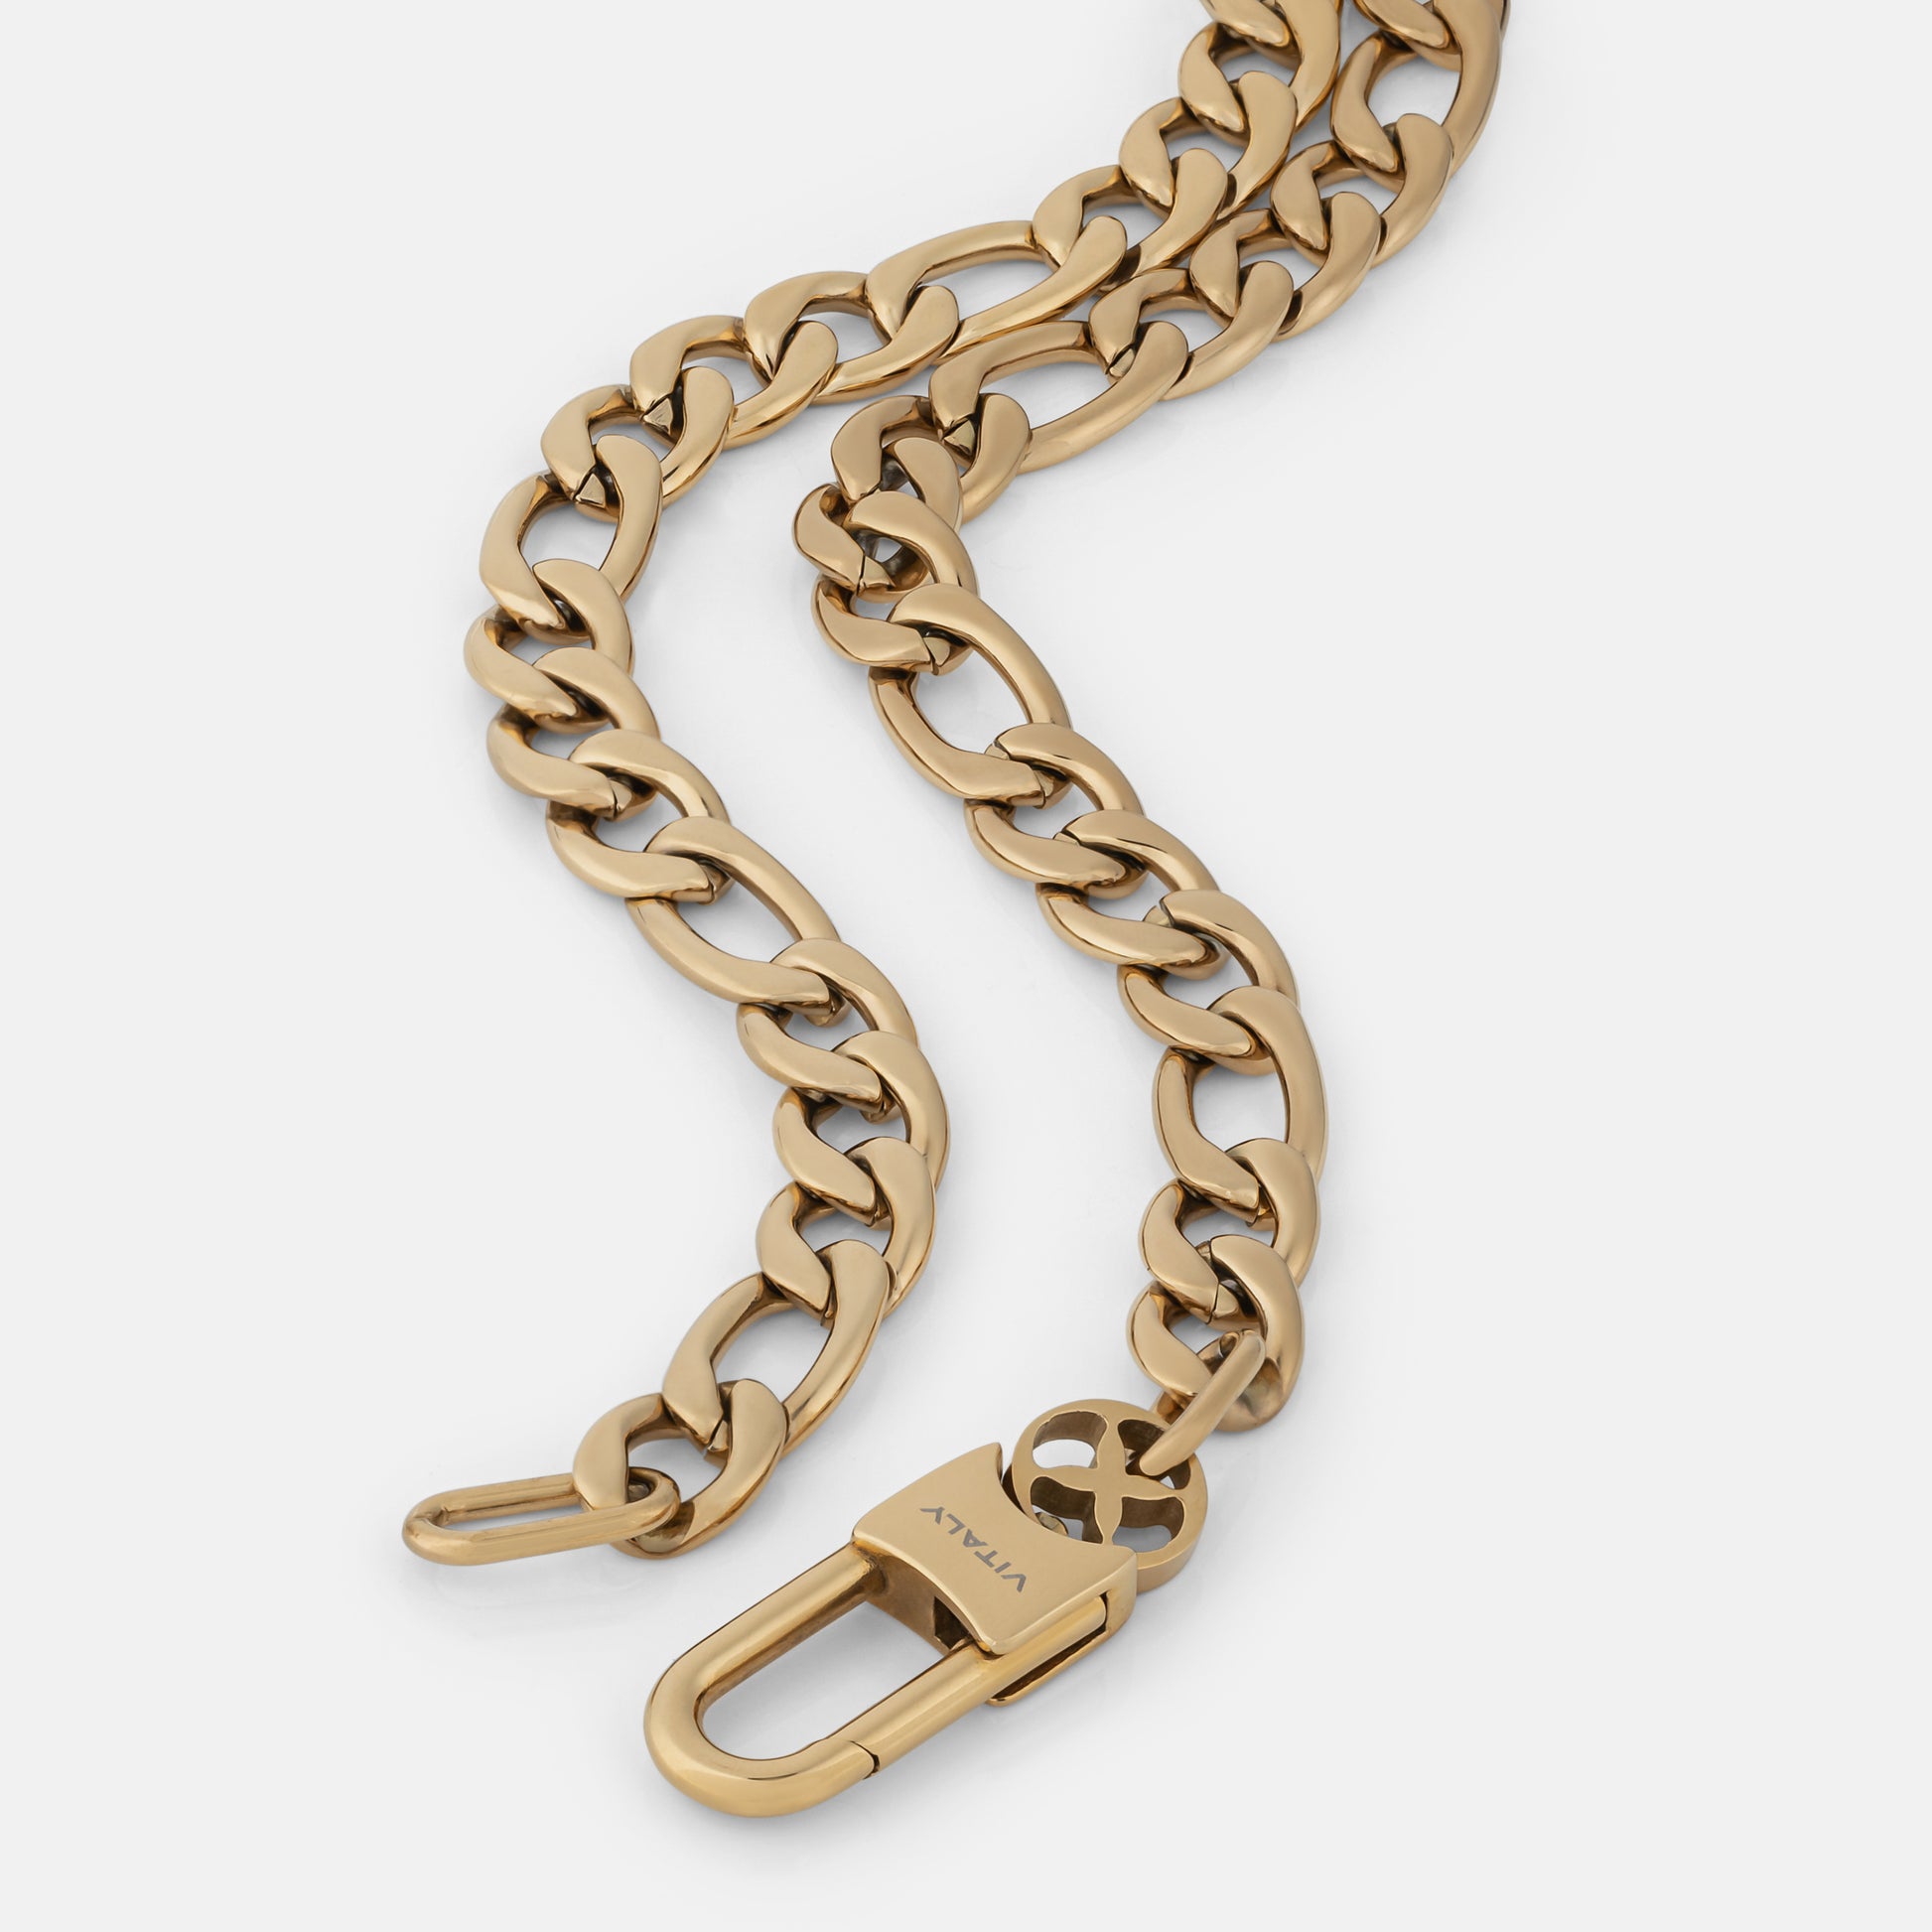 Vitaly Trespass Chain  100% Recycled Stainless Steel Accessories